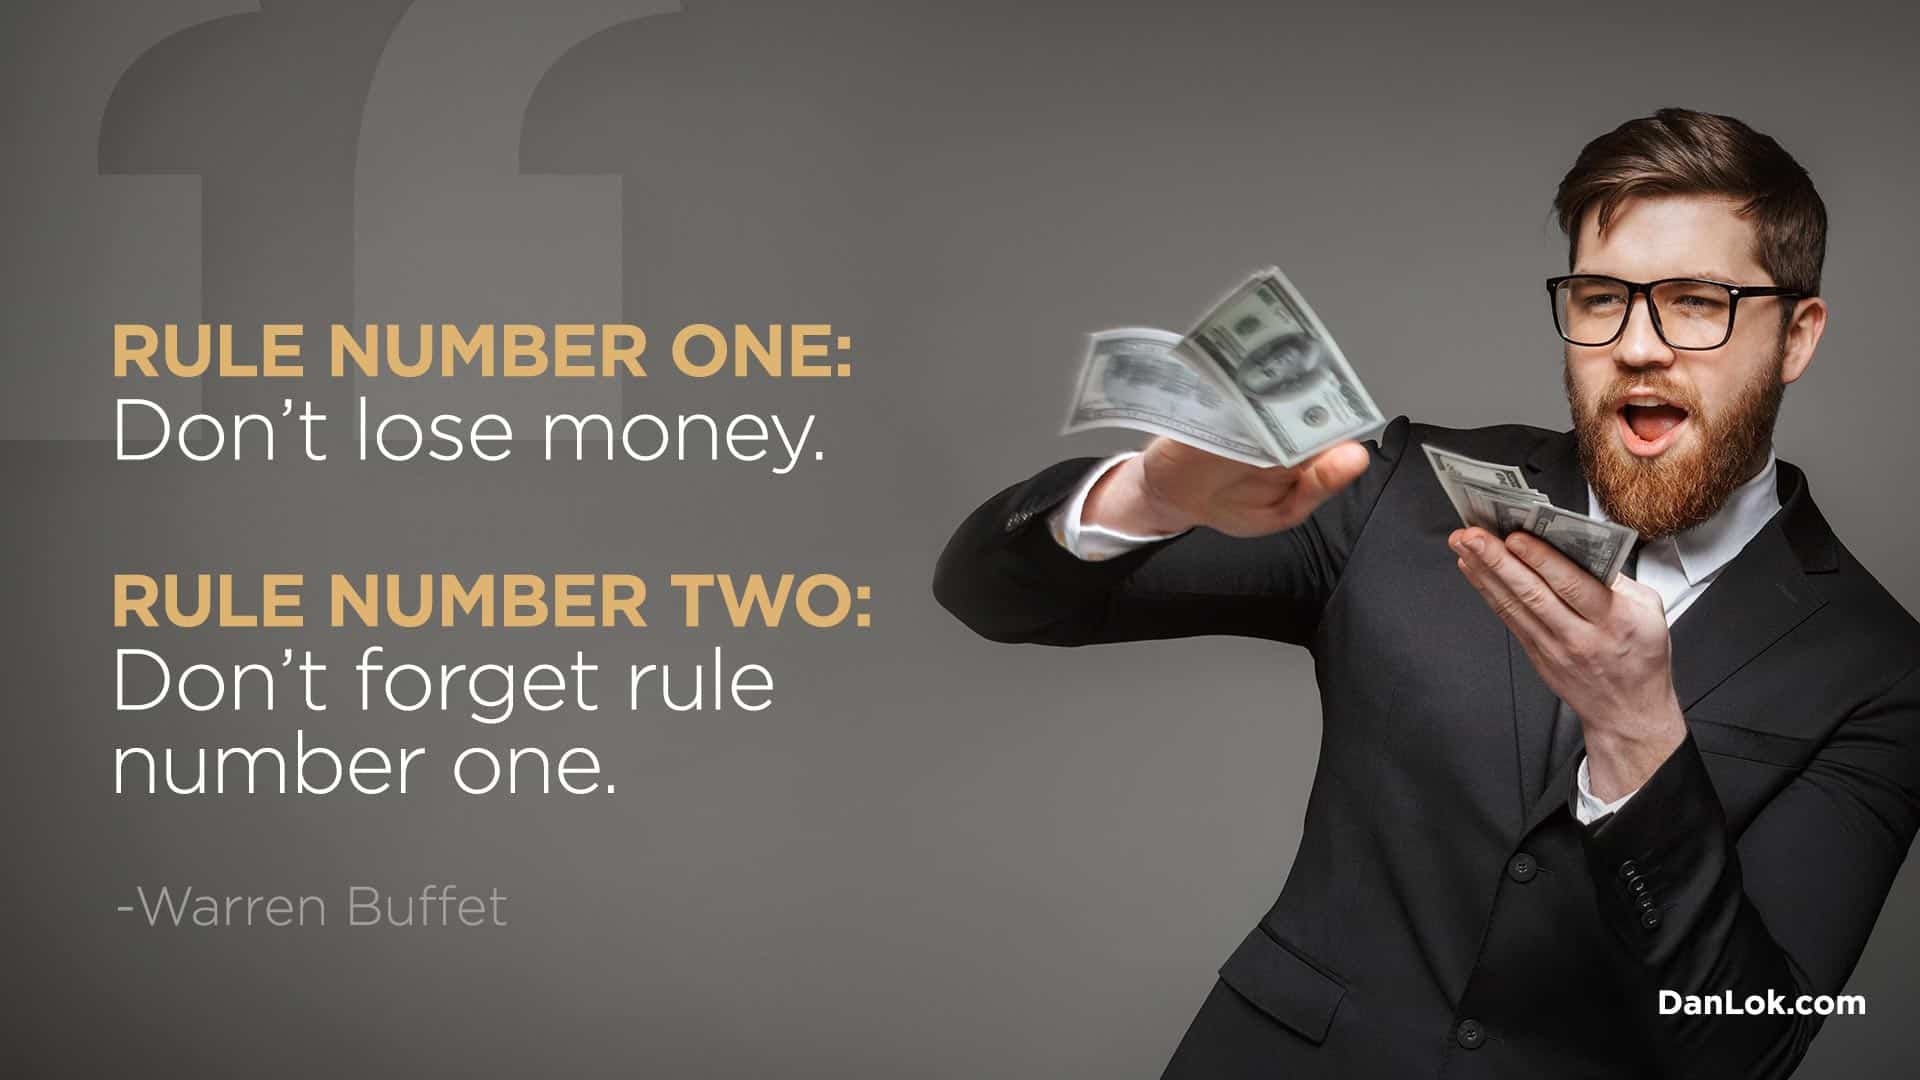 “Rule number one: Don’t lose money. Rule number two: Don’t forget rule number one.” - Warren Buffett